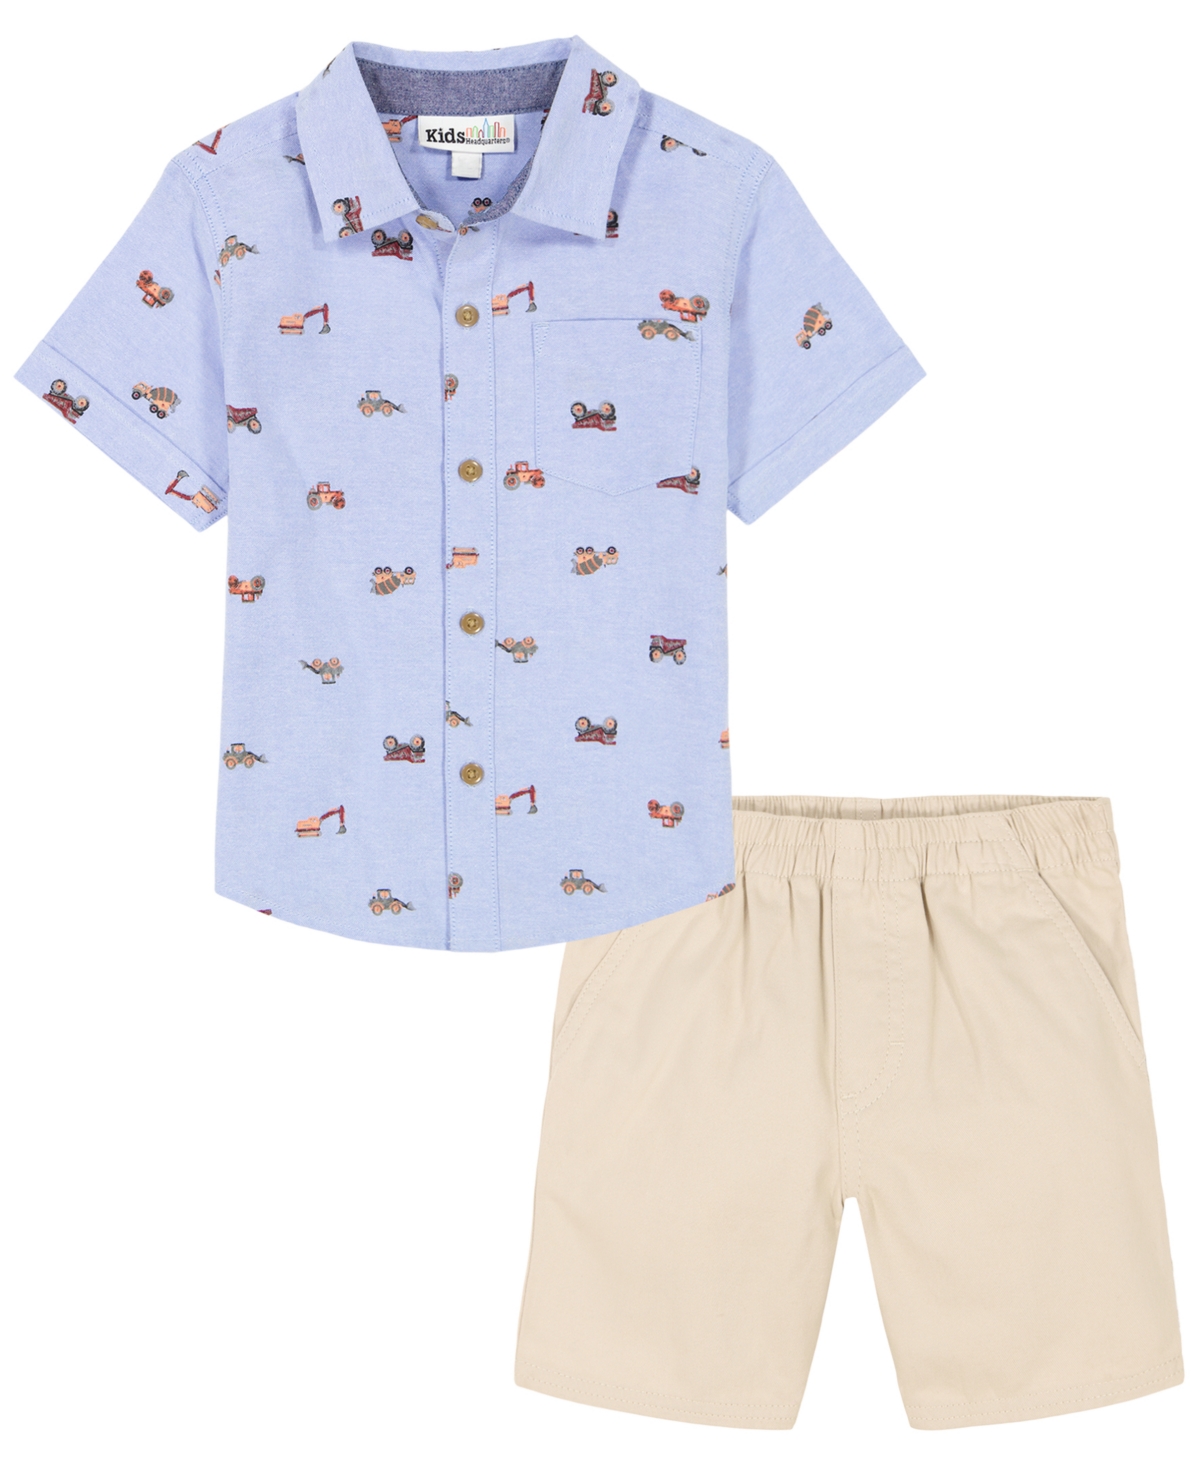 Shop Kids Headquarters Toddler Boys Short Sleeve Printed Oxford Shirt And Twill Shorts, 2 Piece Set In Tan